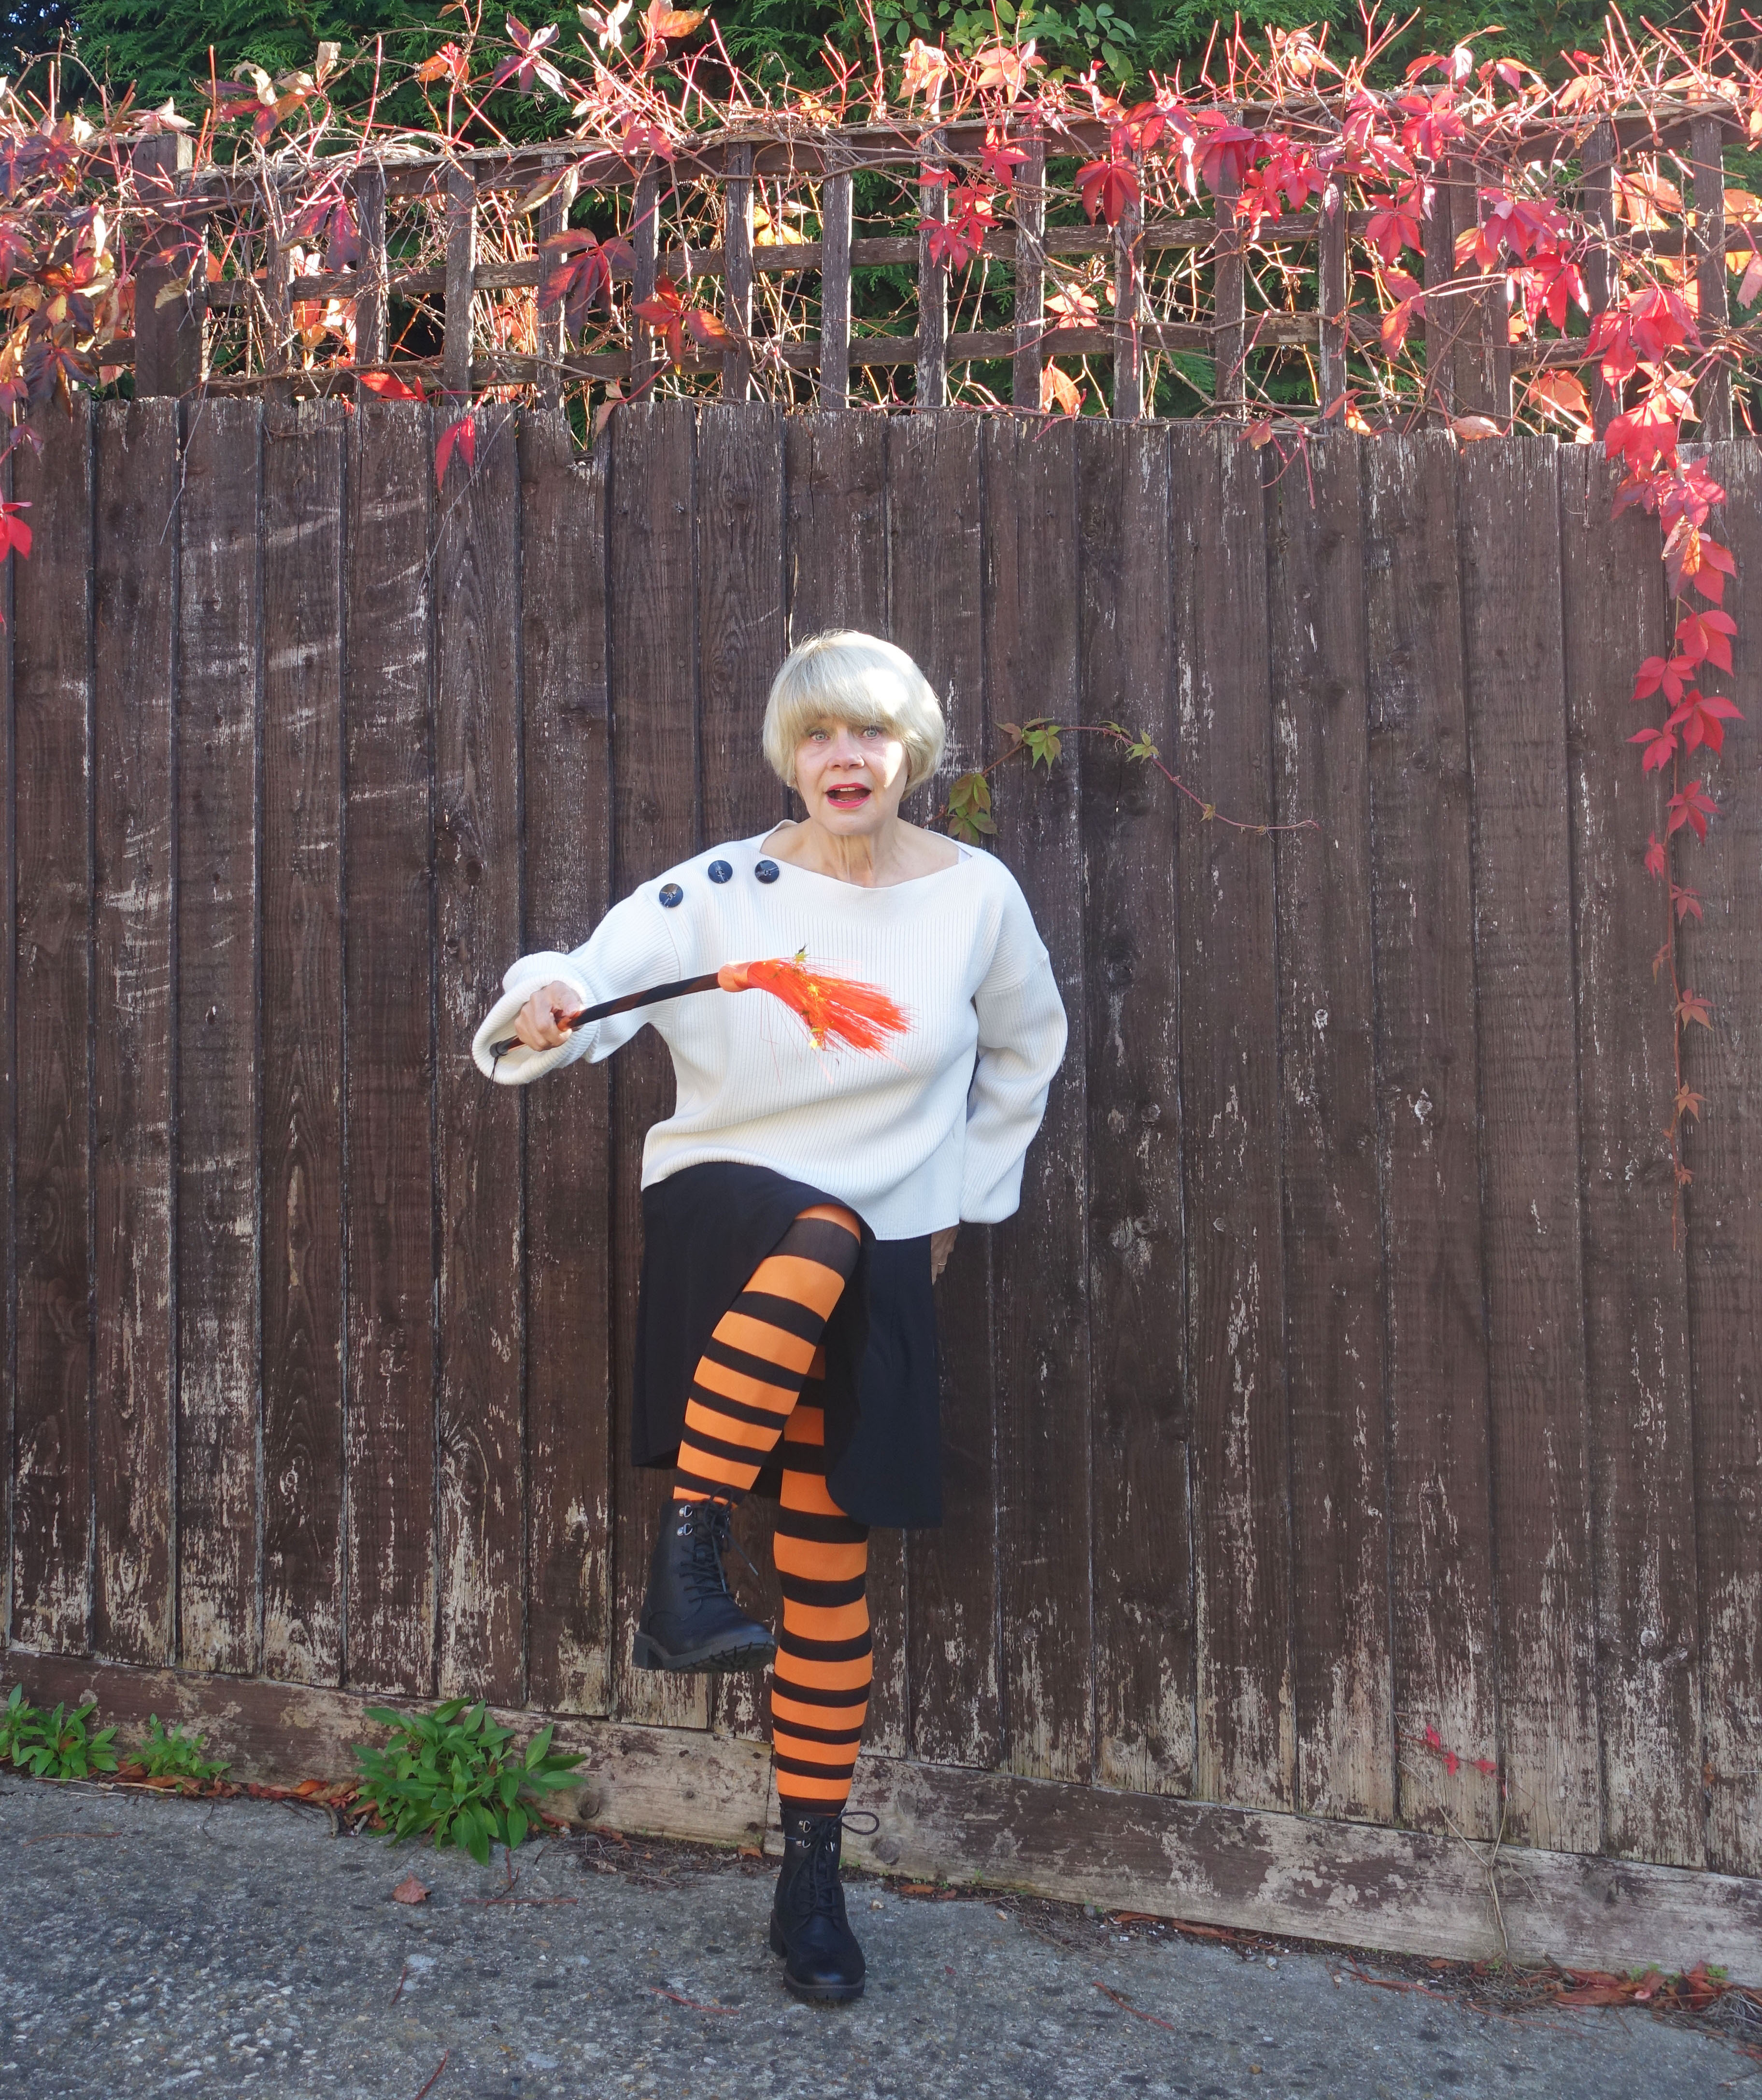 Taking a comedy spin on this month's Style Not Age Challenge, Is This Mutton's Gail Hanlon, who has hardly any orange, wears black and orange striped tights and brandishes a child's orange broomstick